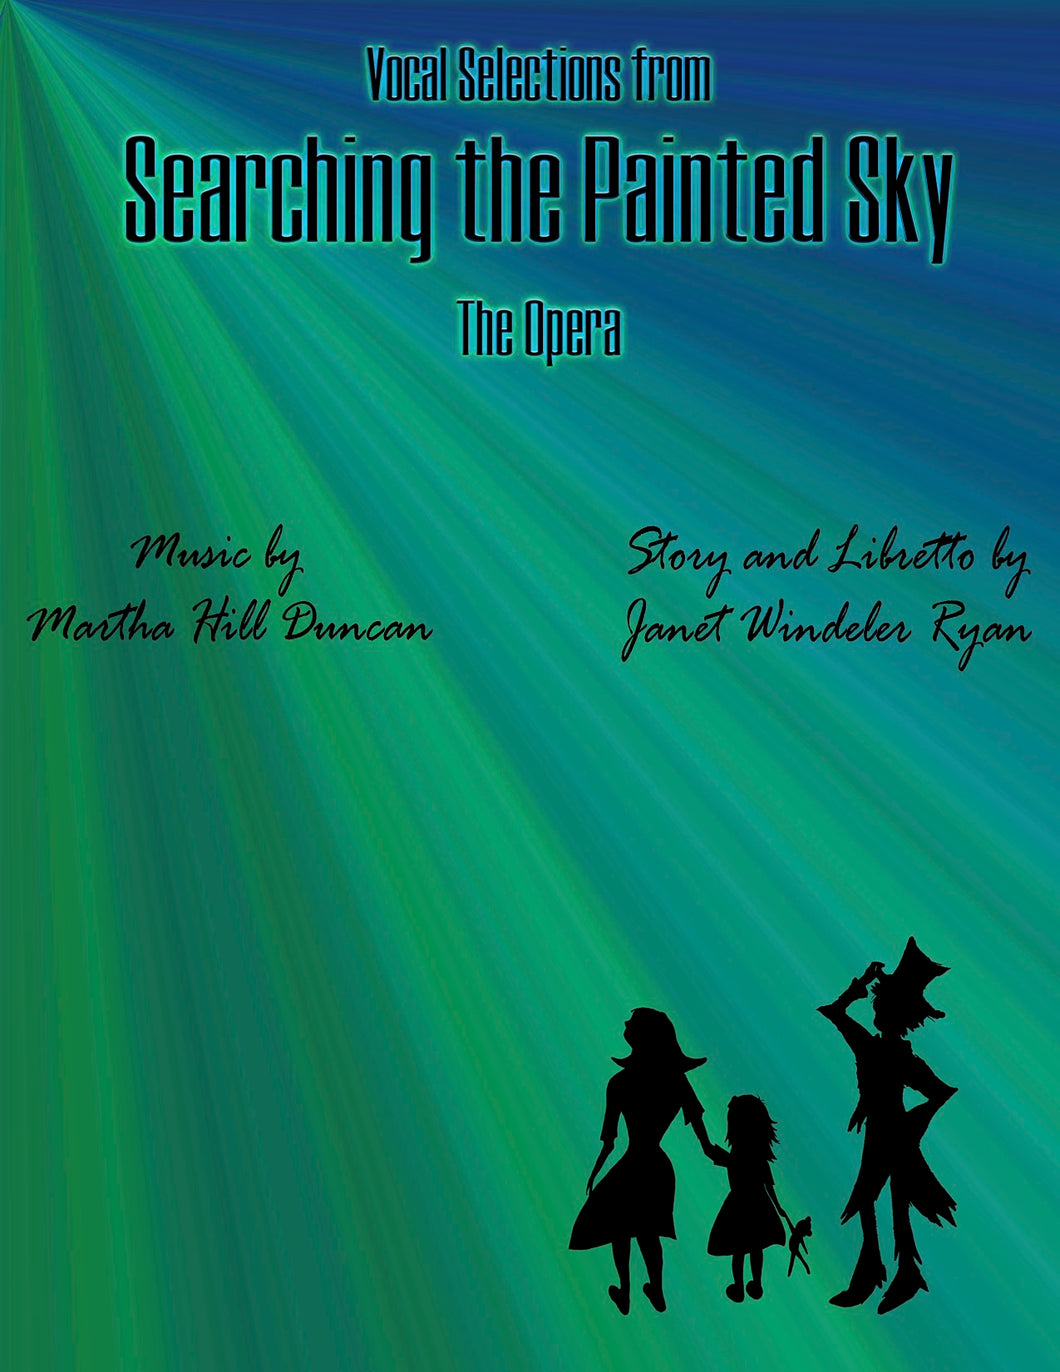 UNDER THE PAINTED SKY - Voice & Piano from SEARCHING THE PAINTED SKY, THE OPERA